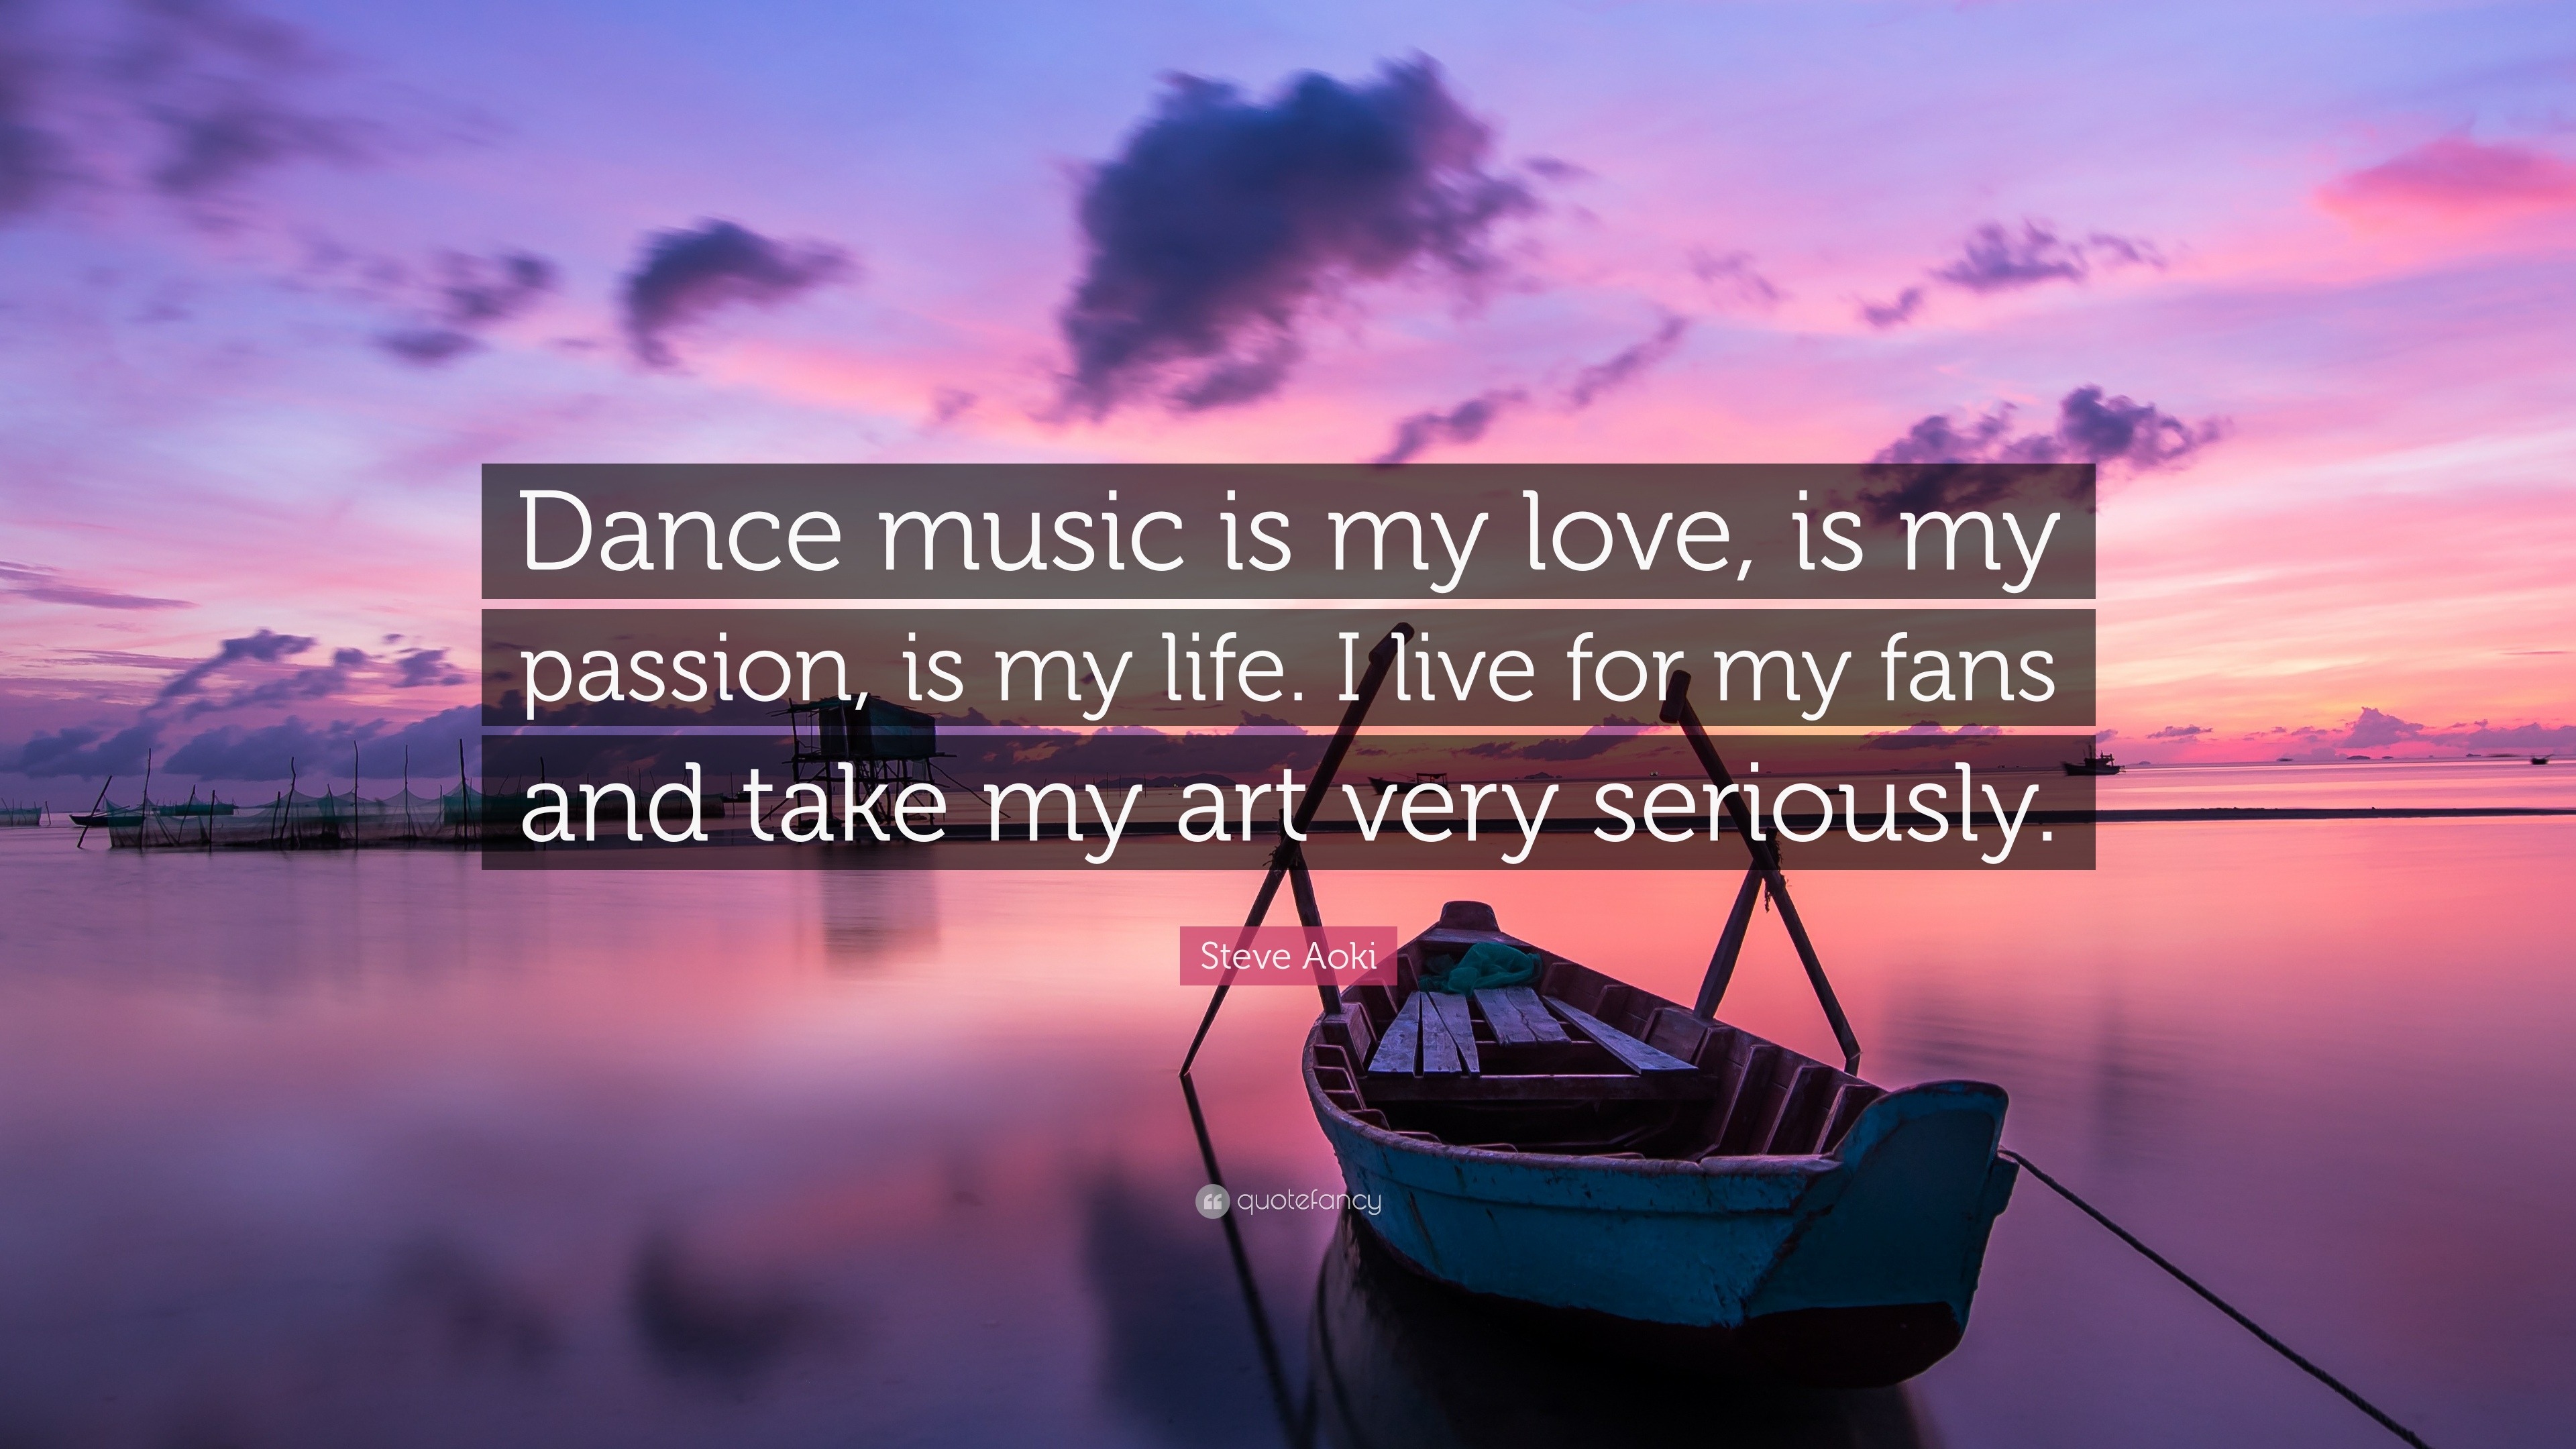 Steve Aoki Quote “Dance music is my love is my passion is